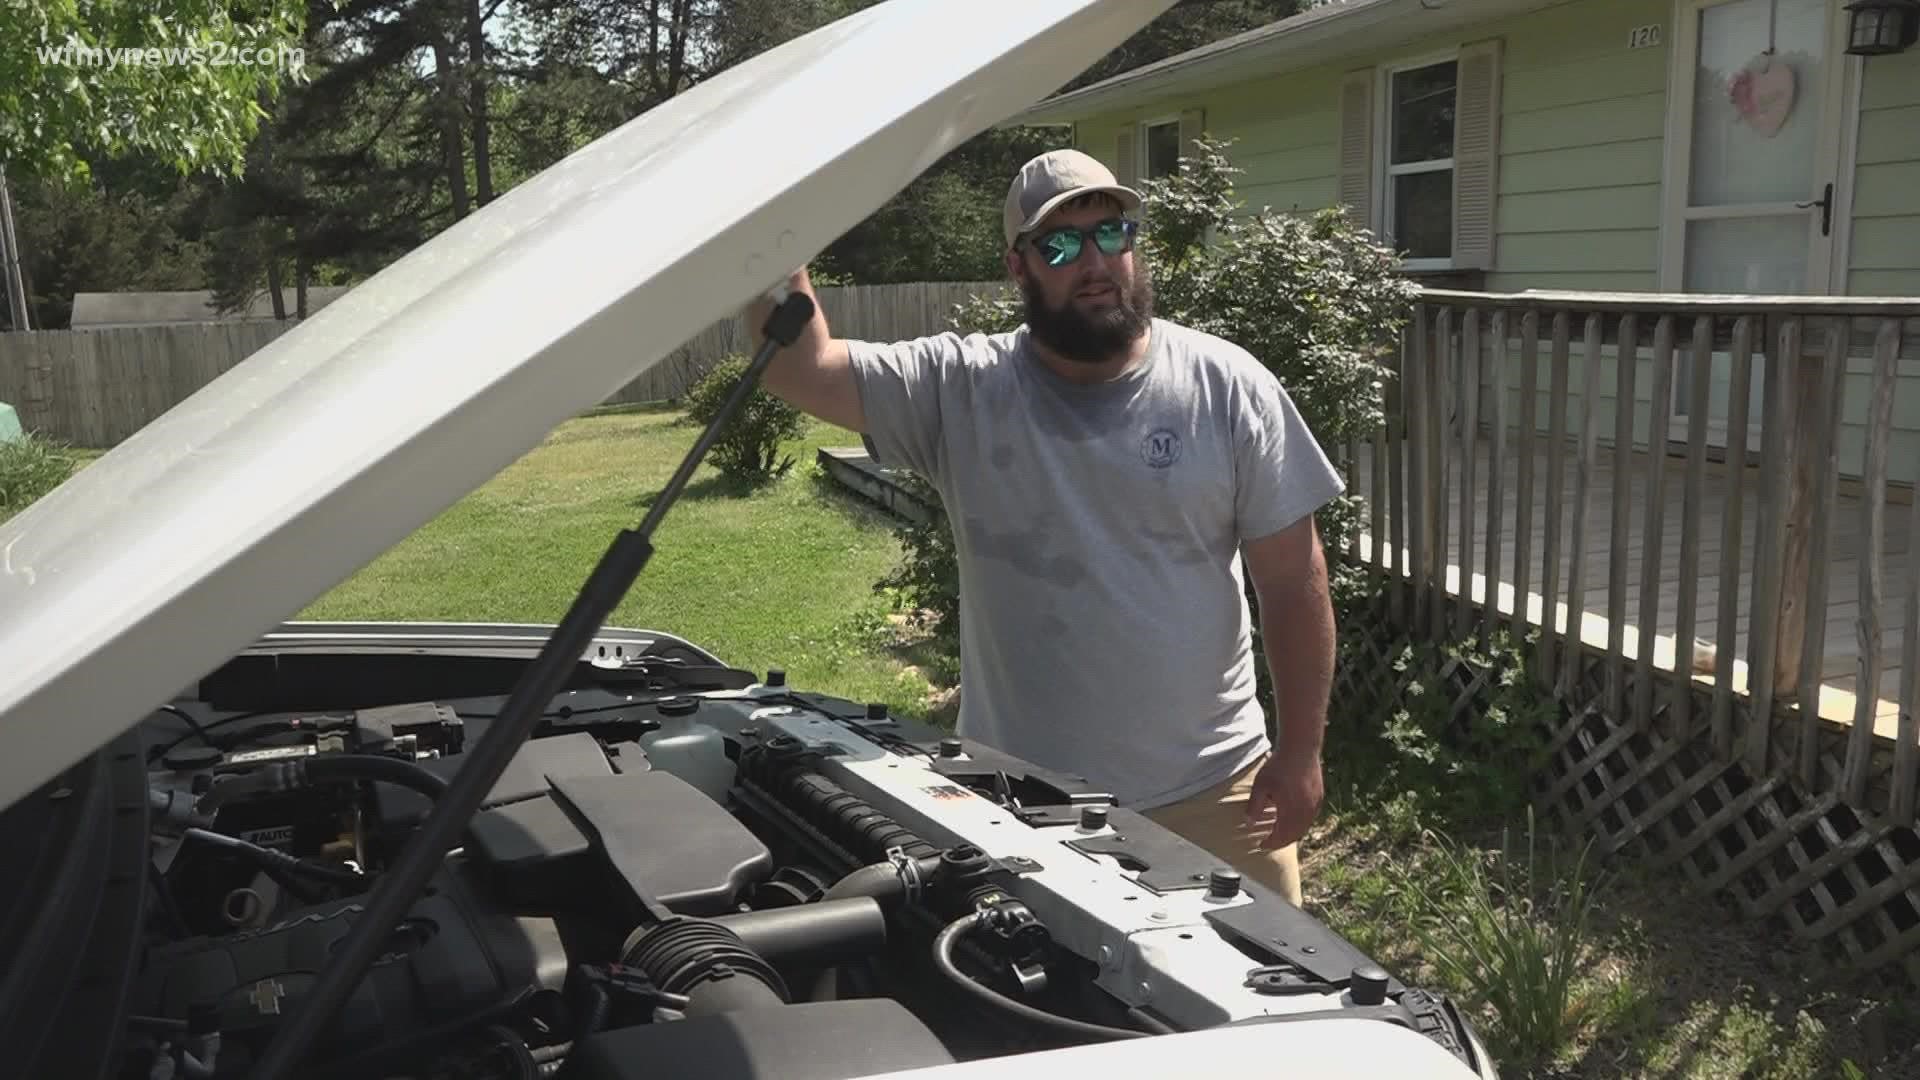 He thought he was getting a truck in good shape. He ended up with a big headache.